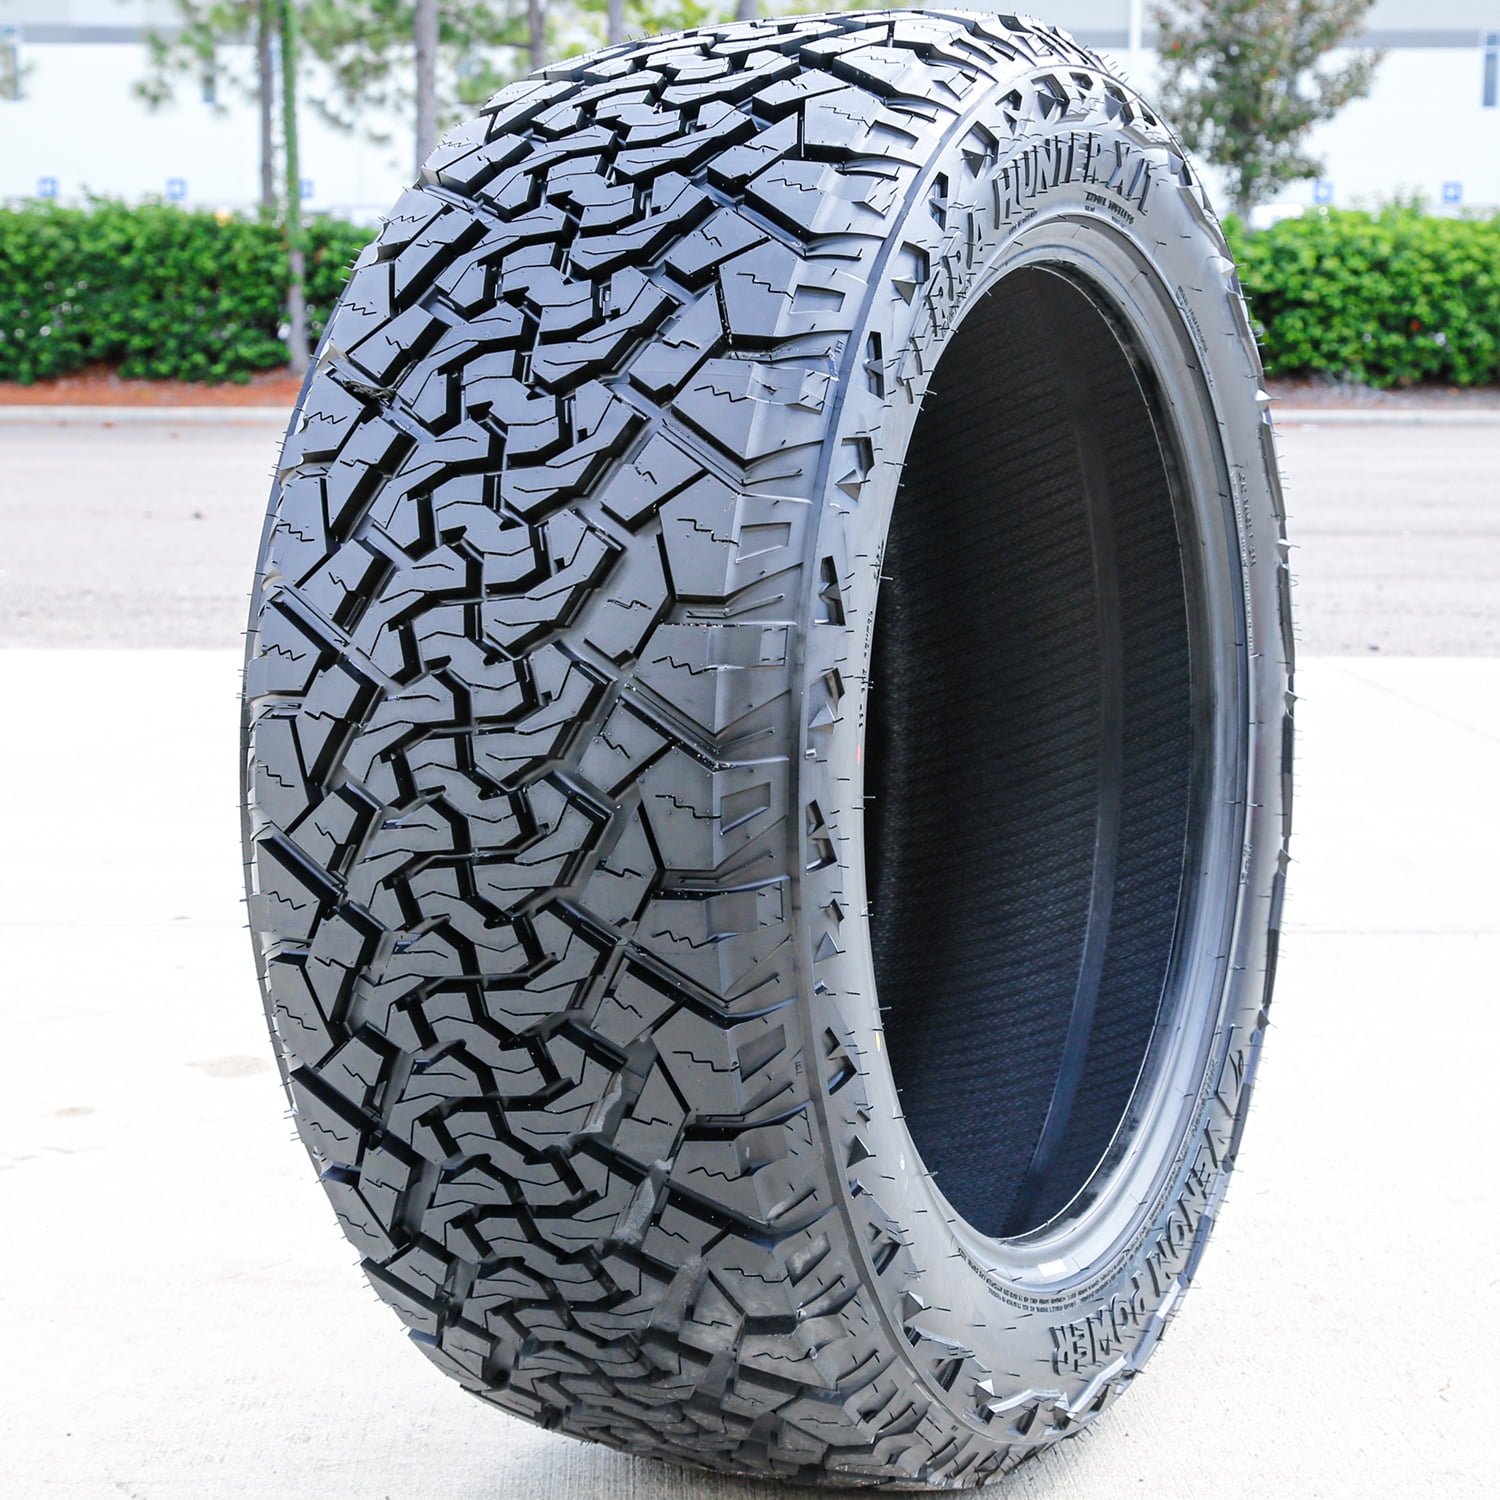 BSW (2 215/65R17 WinterContact Continental P Tires) TS850 99H